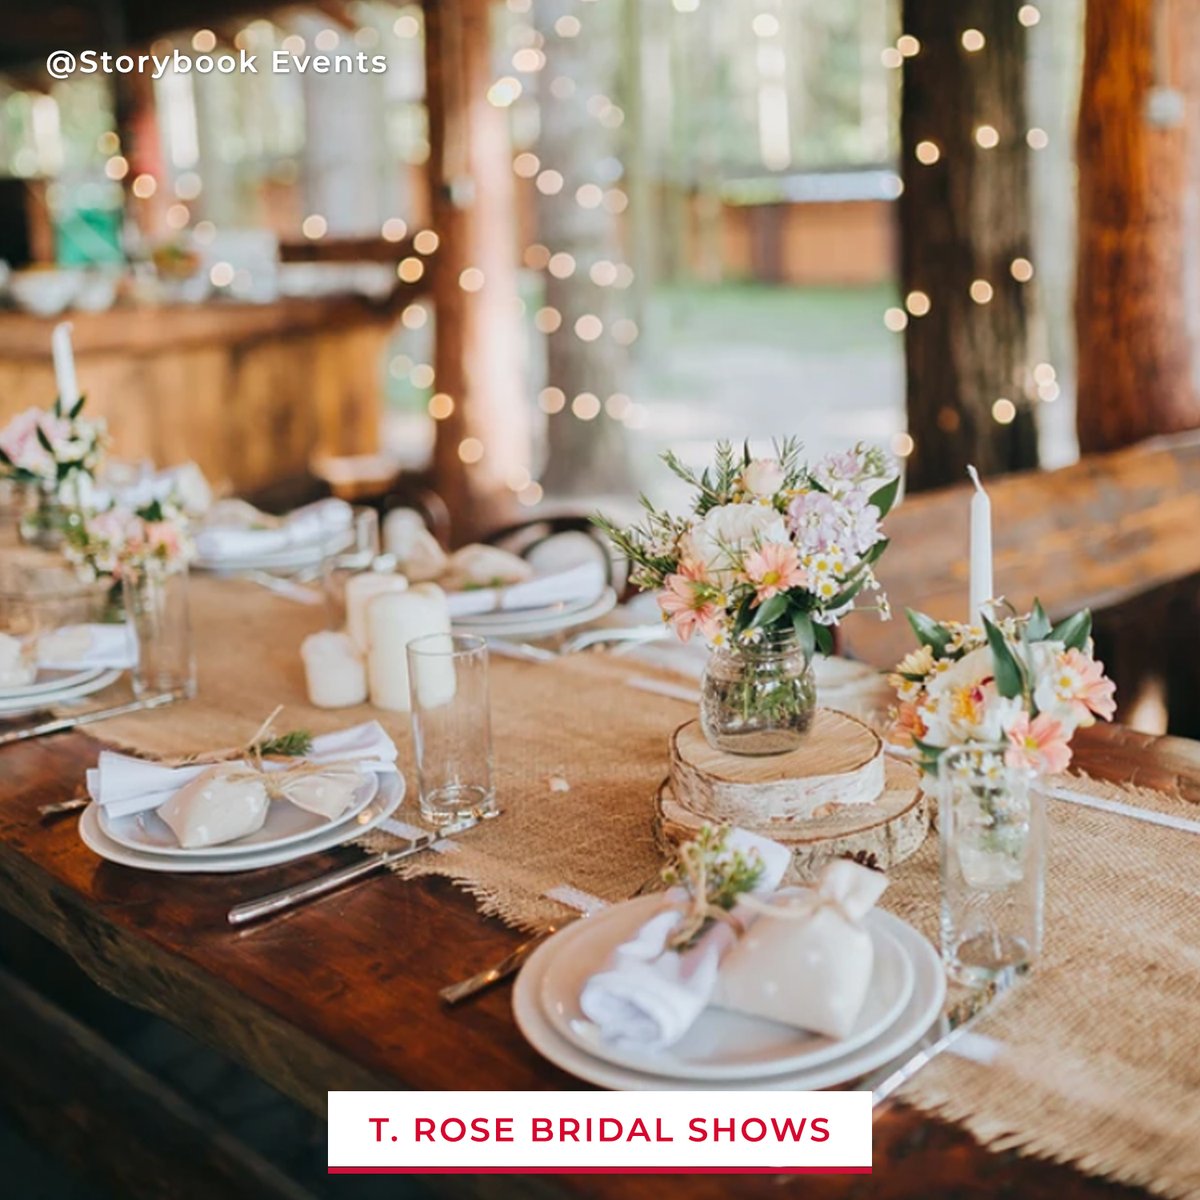 By just looking at this gorgeous and exquisite wedding table setup, we're all mesmerized by its rustic elegance! 🤩

Repost @Storybook Events

#trosebridalshows #weddingdecorations #setup #wedding #rustic #elegant #ad